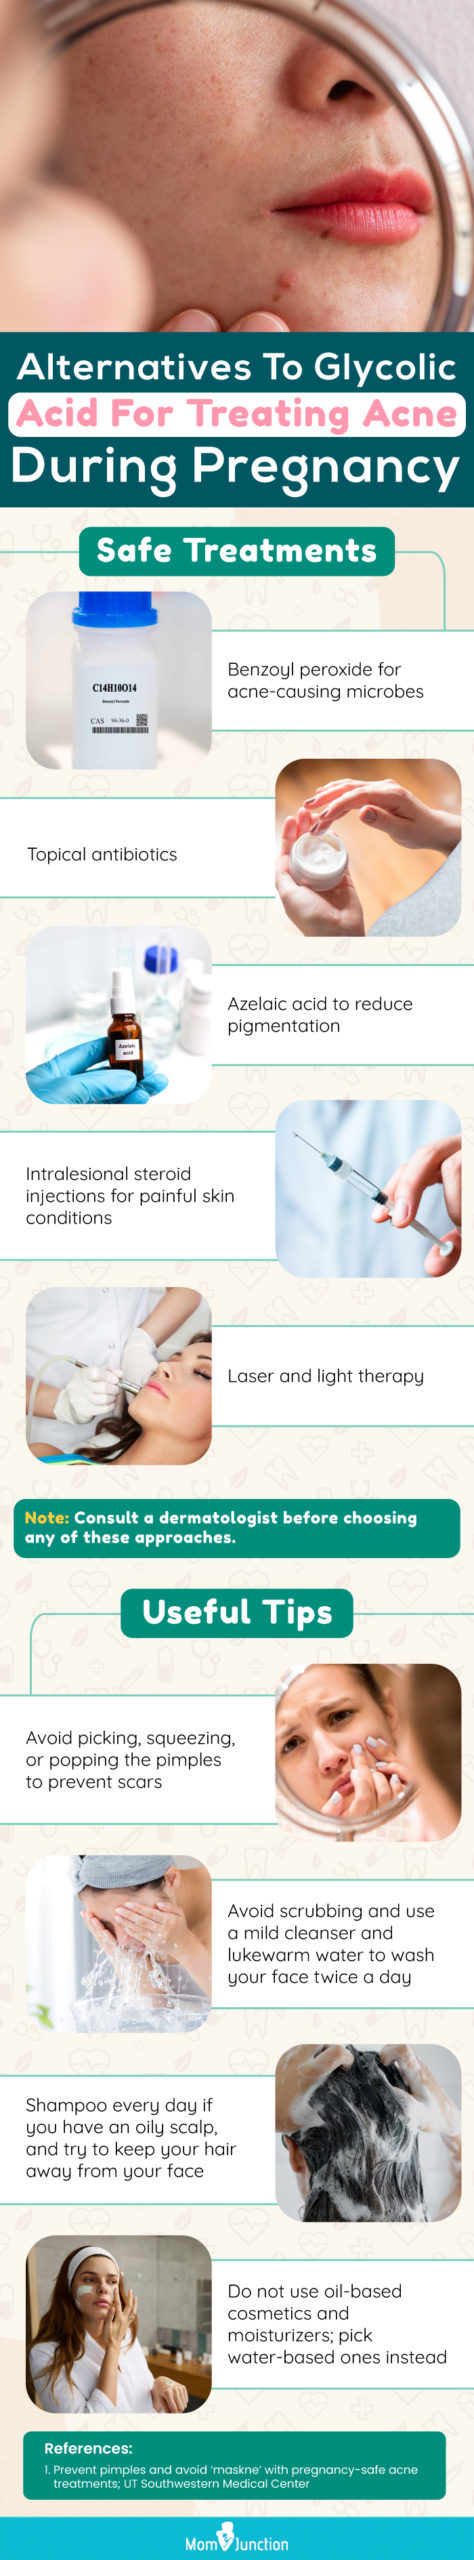 alternatives to glycolic acid for treating acne during pregnancy (infographic) 